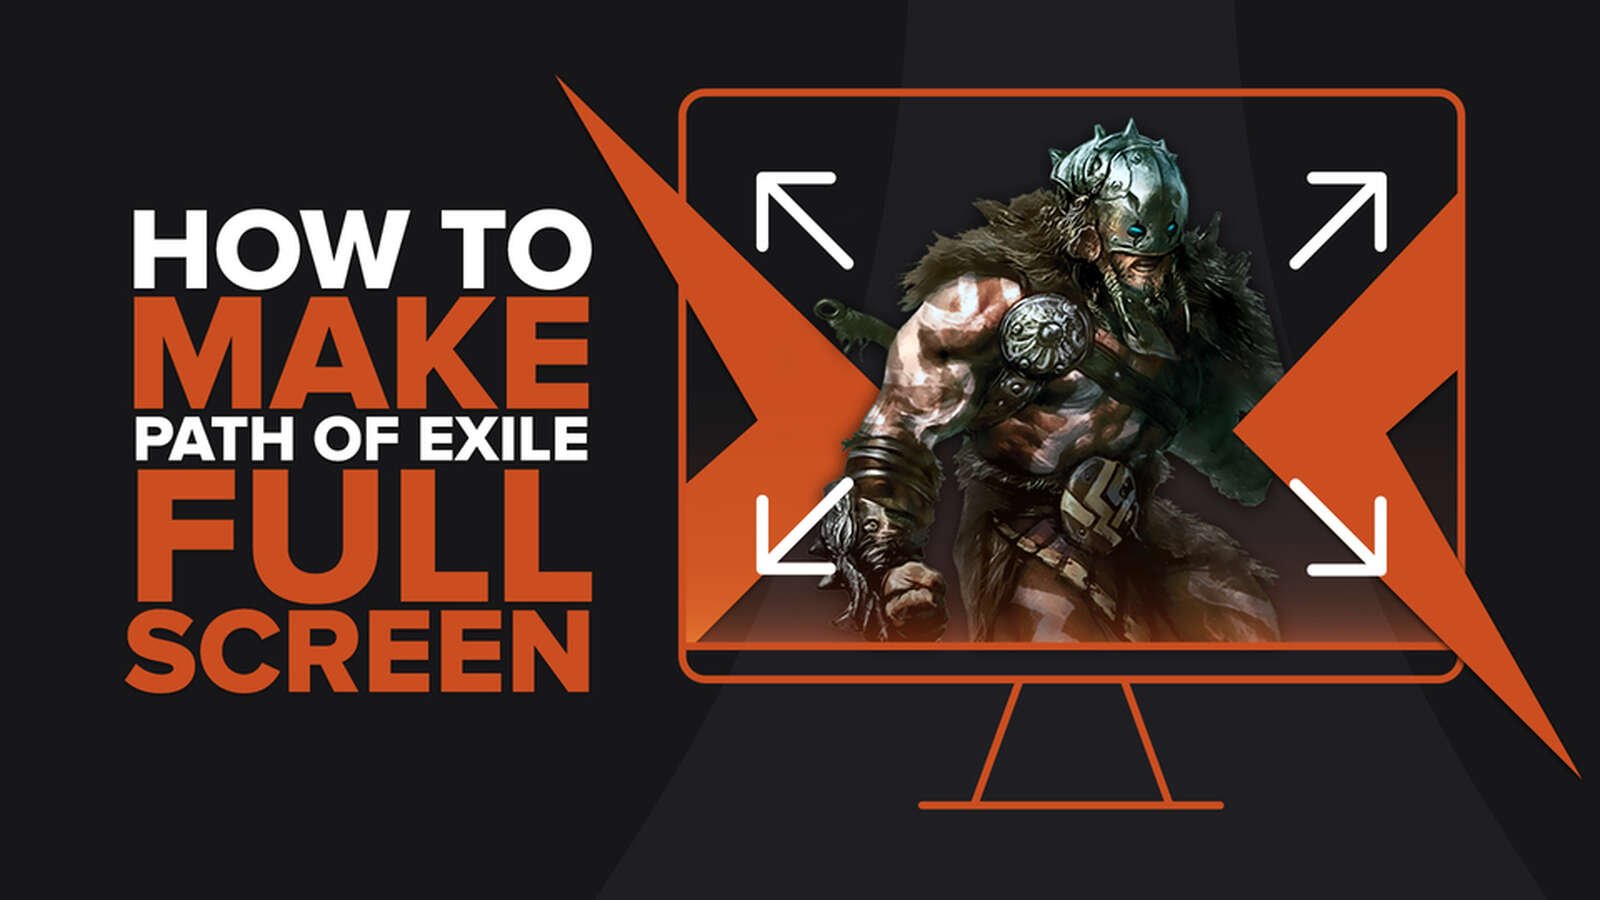 How to make Path of Exile fullscreen on PC [Quick fix]